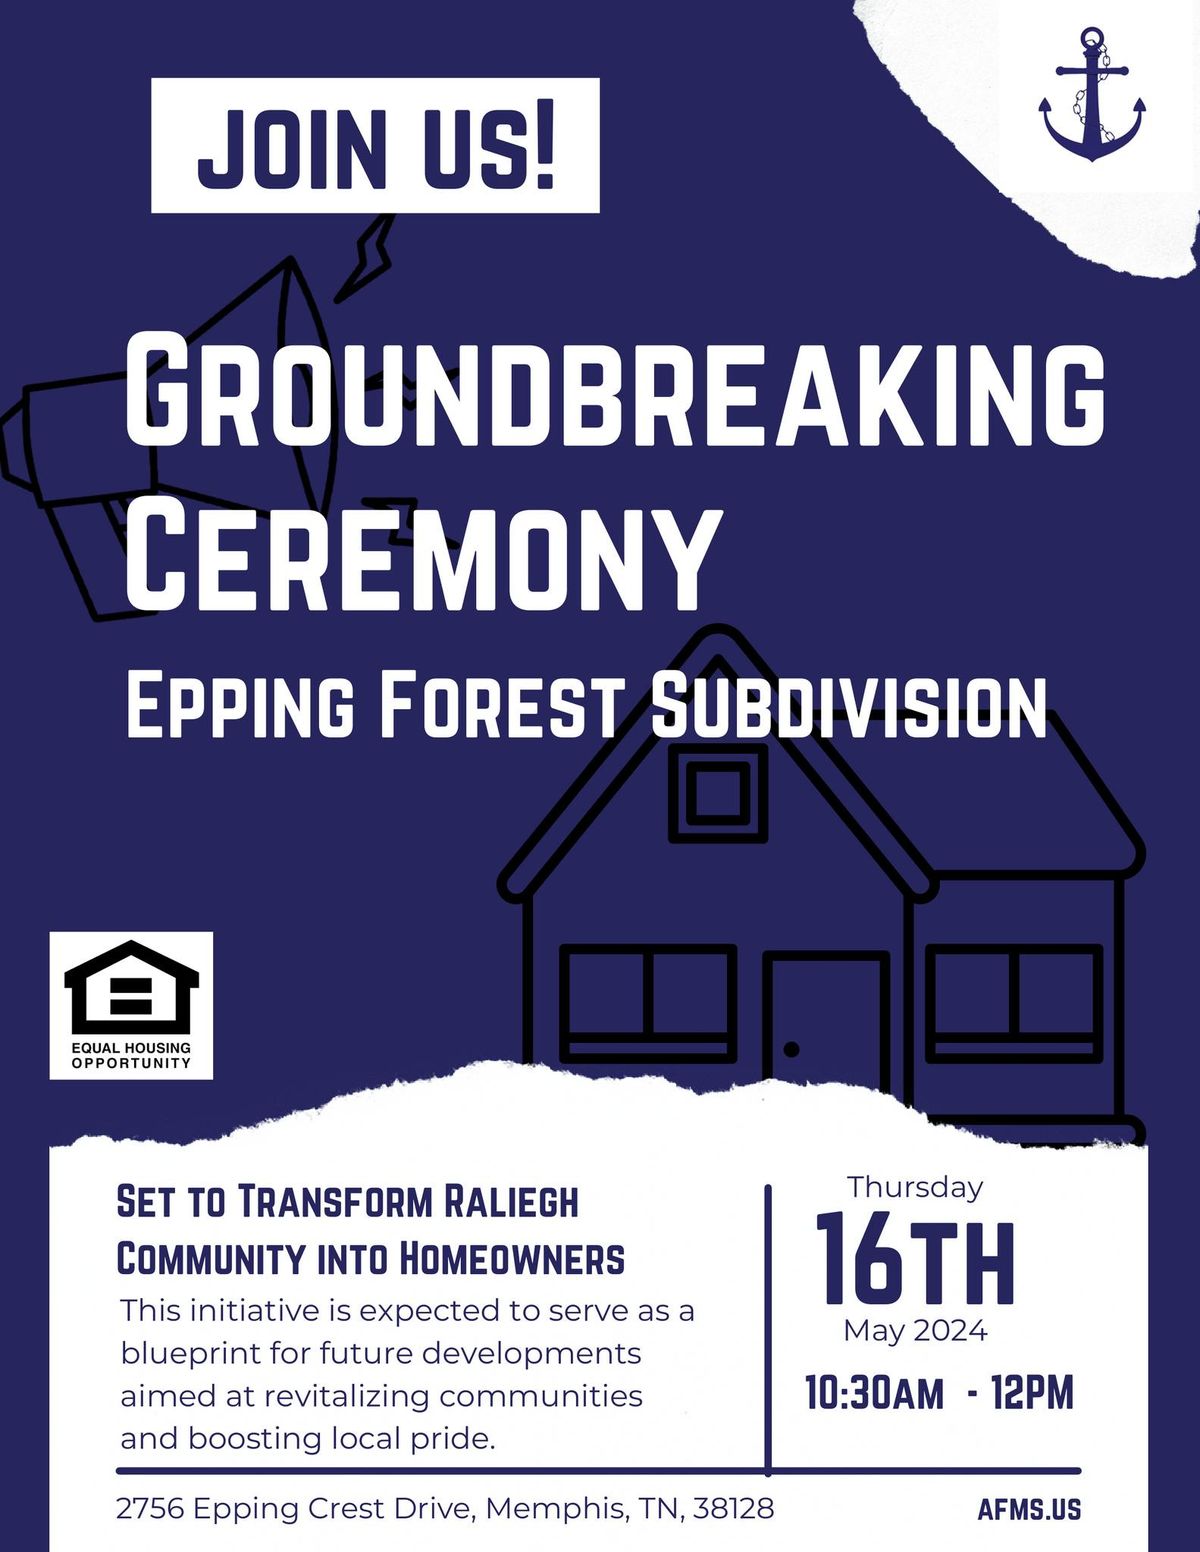 Groundbreaking Ceremony to Usher in a New Era of Homeownership in Epping Forest, Raleigh